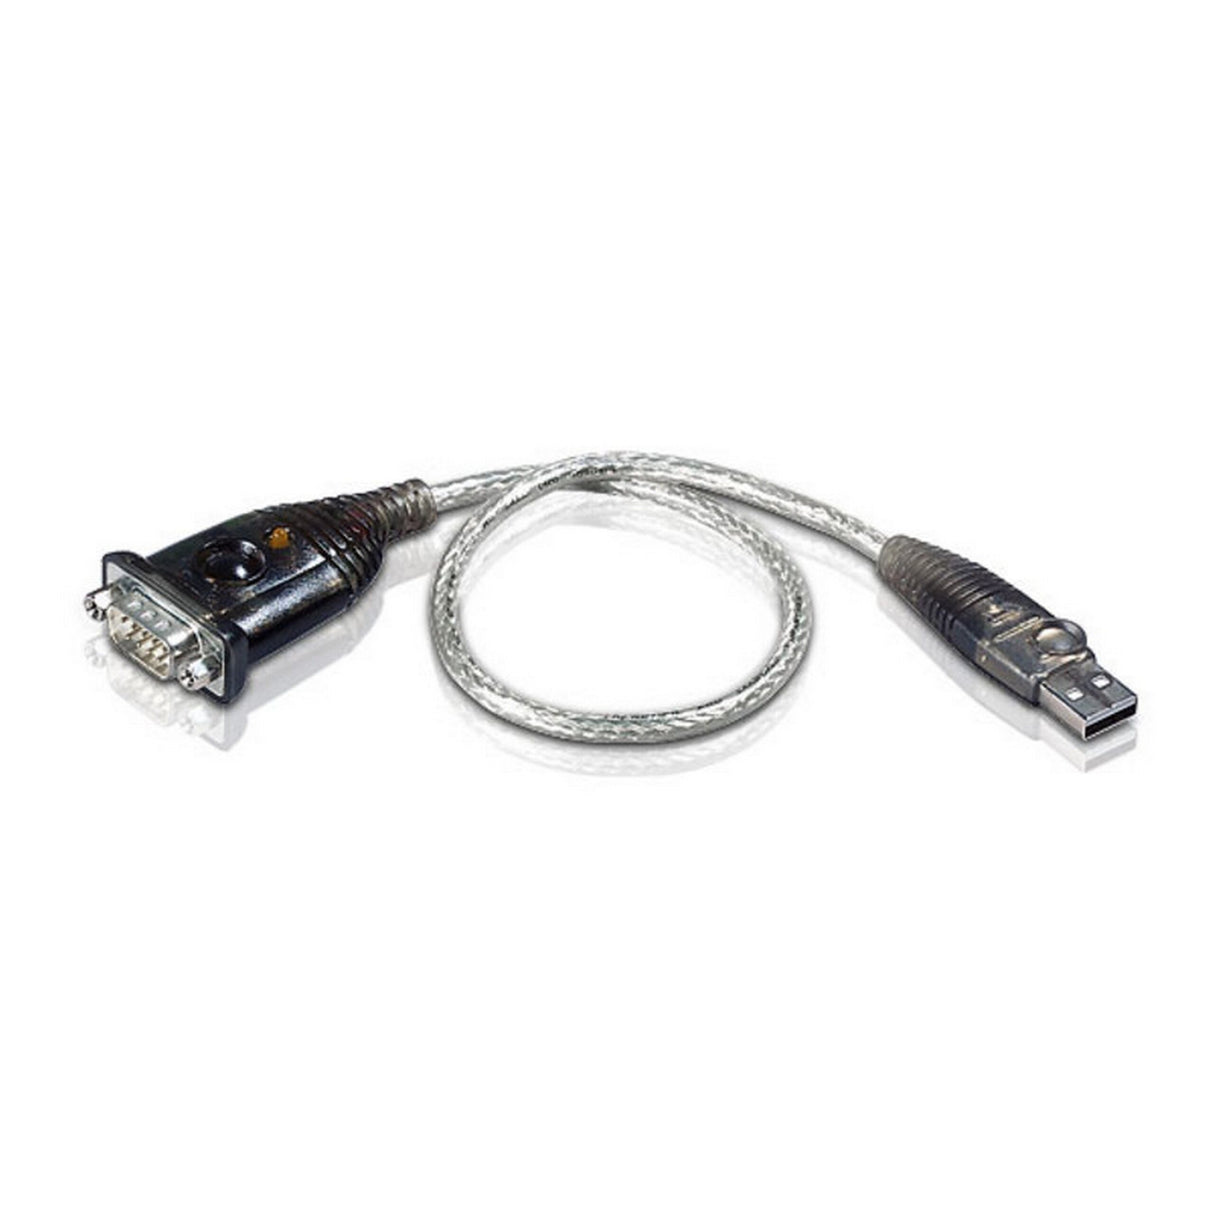 ATEN UC232A USB to RS-232 Adapter, 35 Centimeters